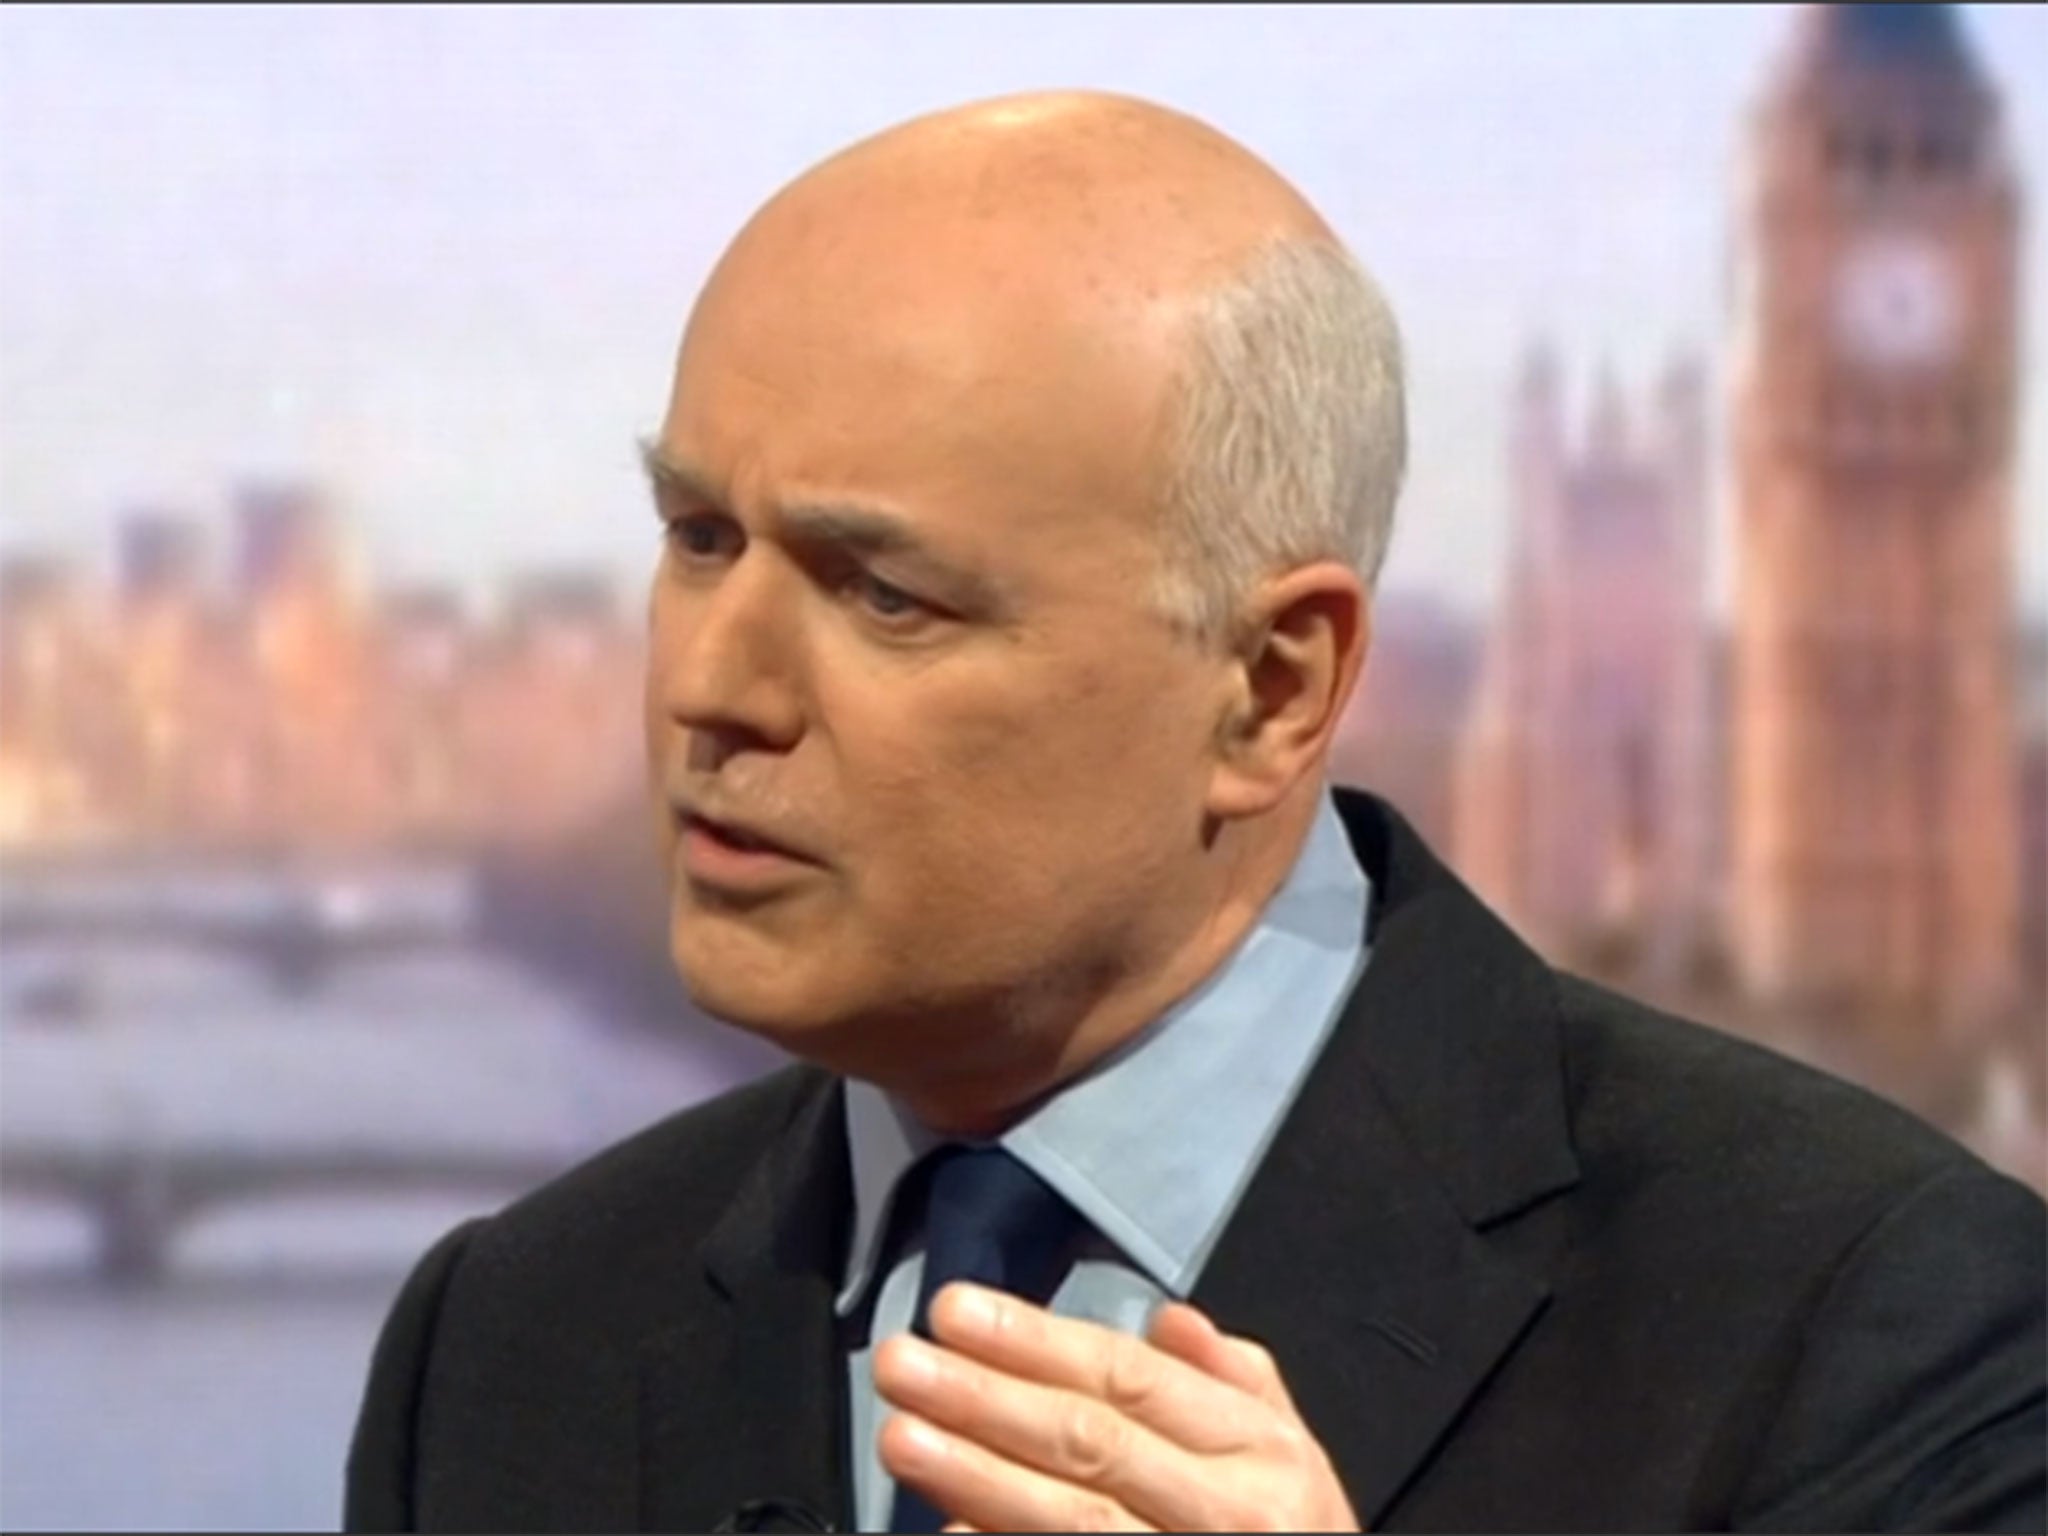 Iain Duncan Smith speaks to Andrew Marr on Sunday 20 March 2016